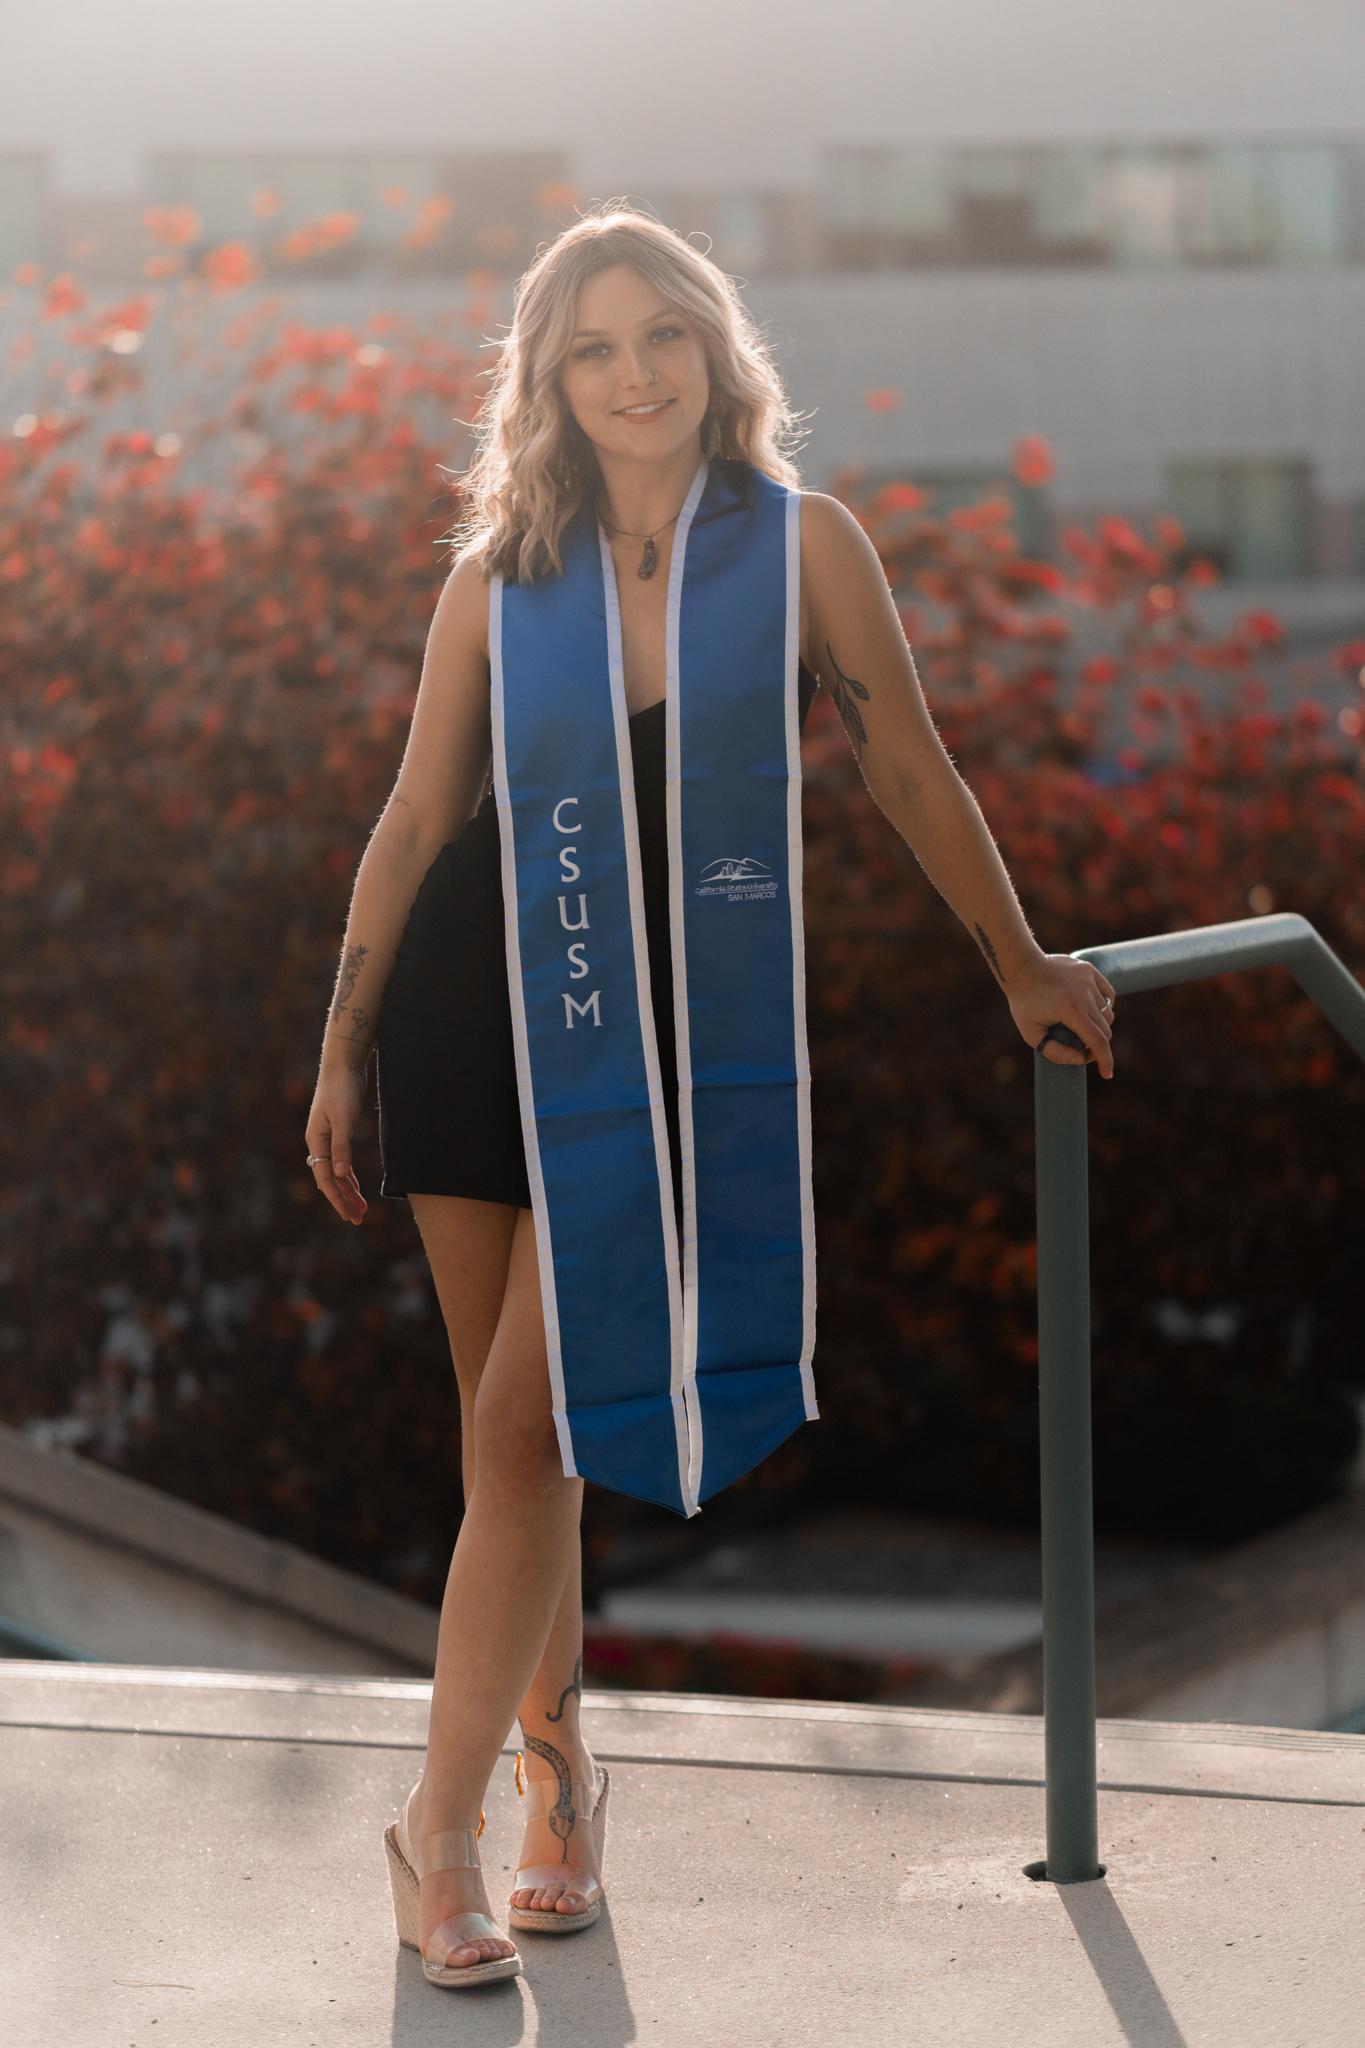 Graduated from CSU San Marcos in 2022 earning a BA in Mass Media Communications with an emphasis on Art, Media, and Design.